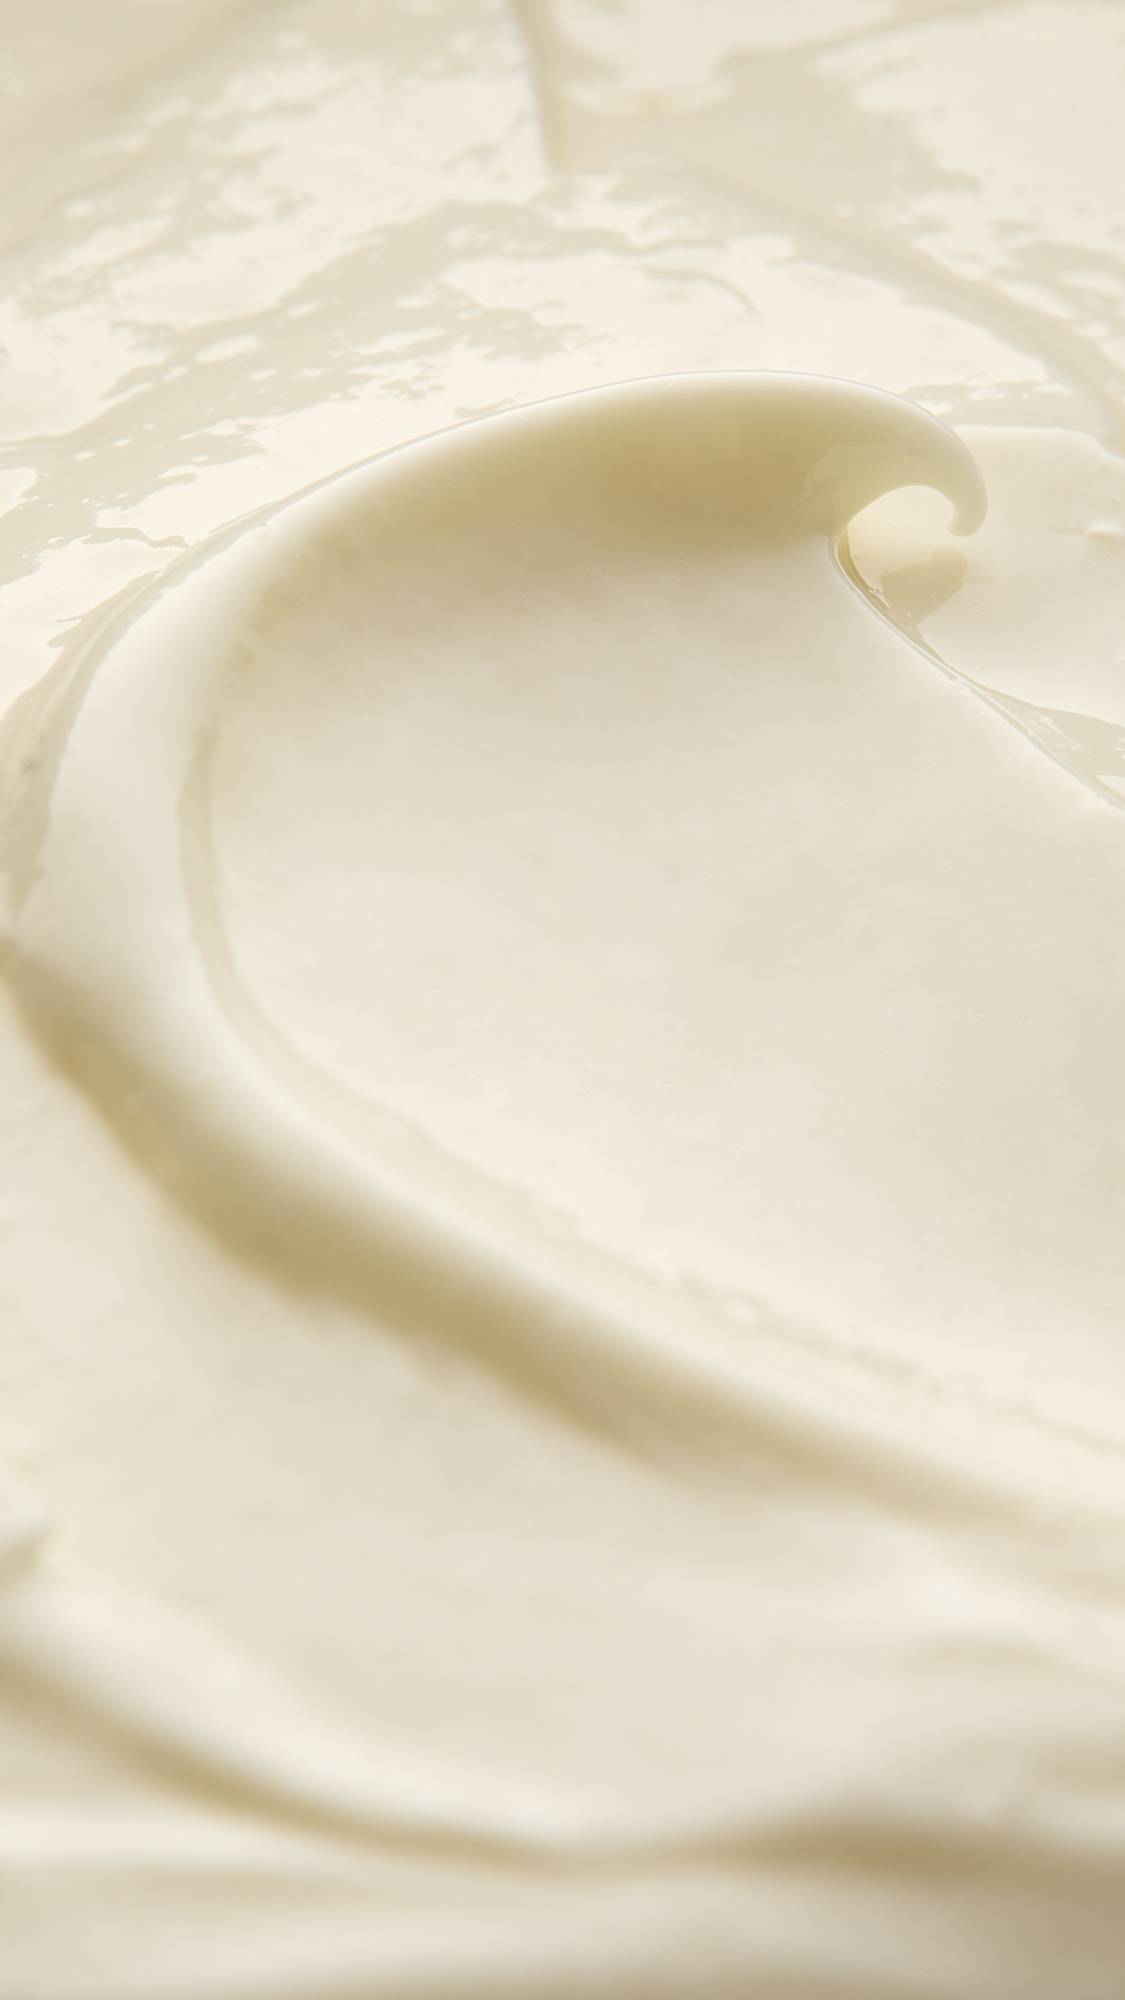 A super close-up of the Enzymion self-preserving moisturiser focusing on the thick, creamy consistency of the lotion showing a curled peak of lotion slicked through the product. 